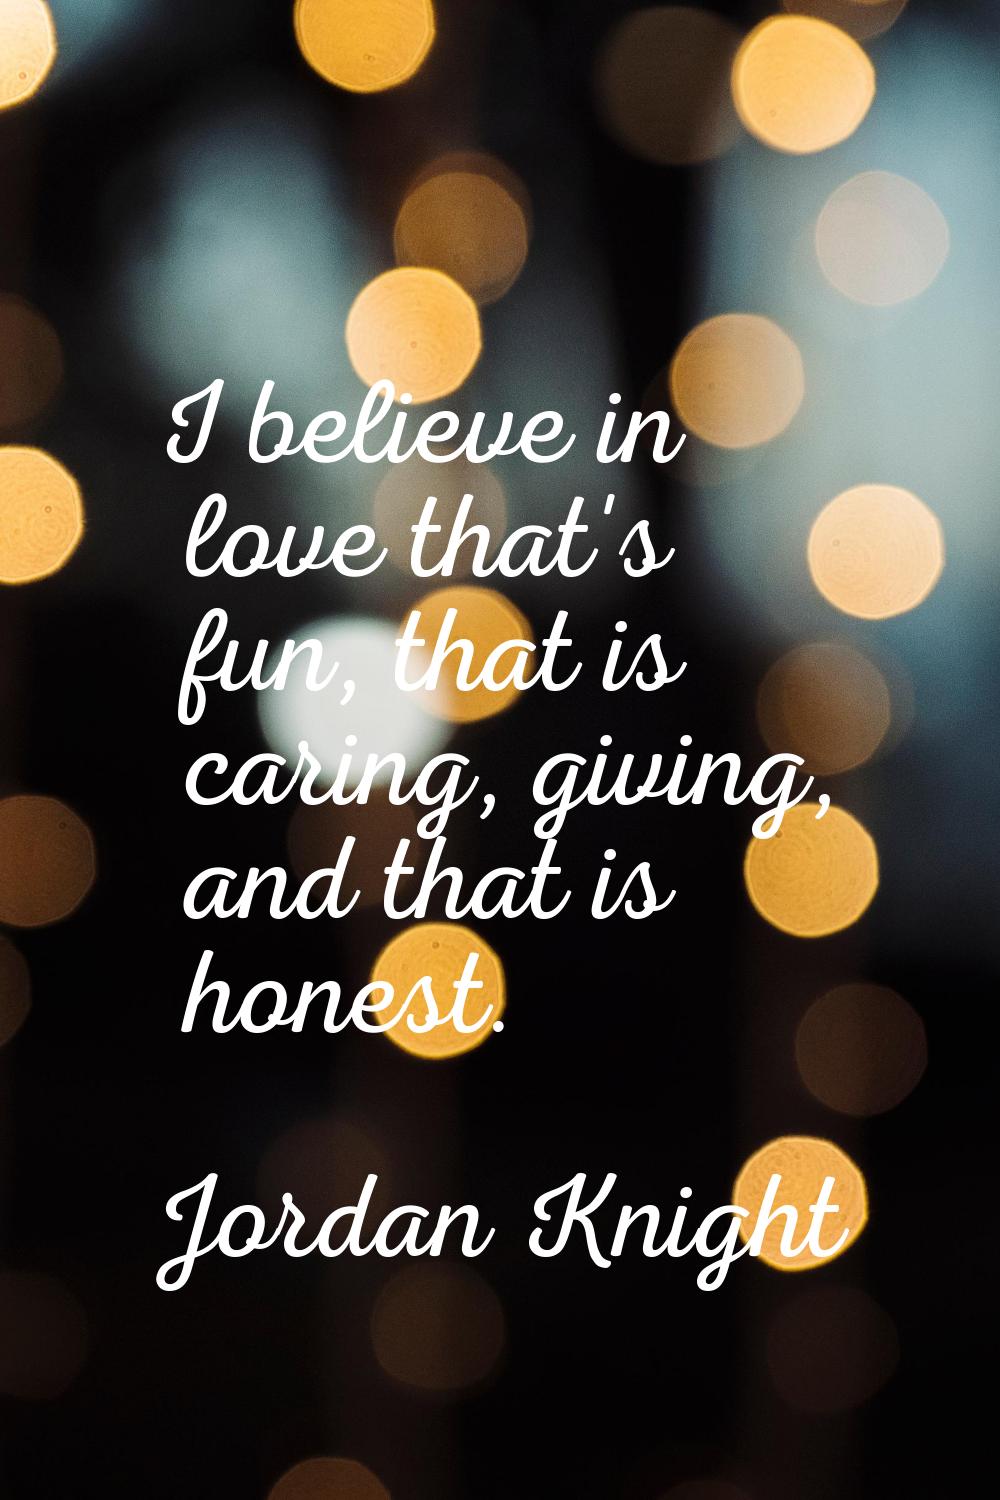 I believe in love that's fun, that is caring, giving, and that is honest.